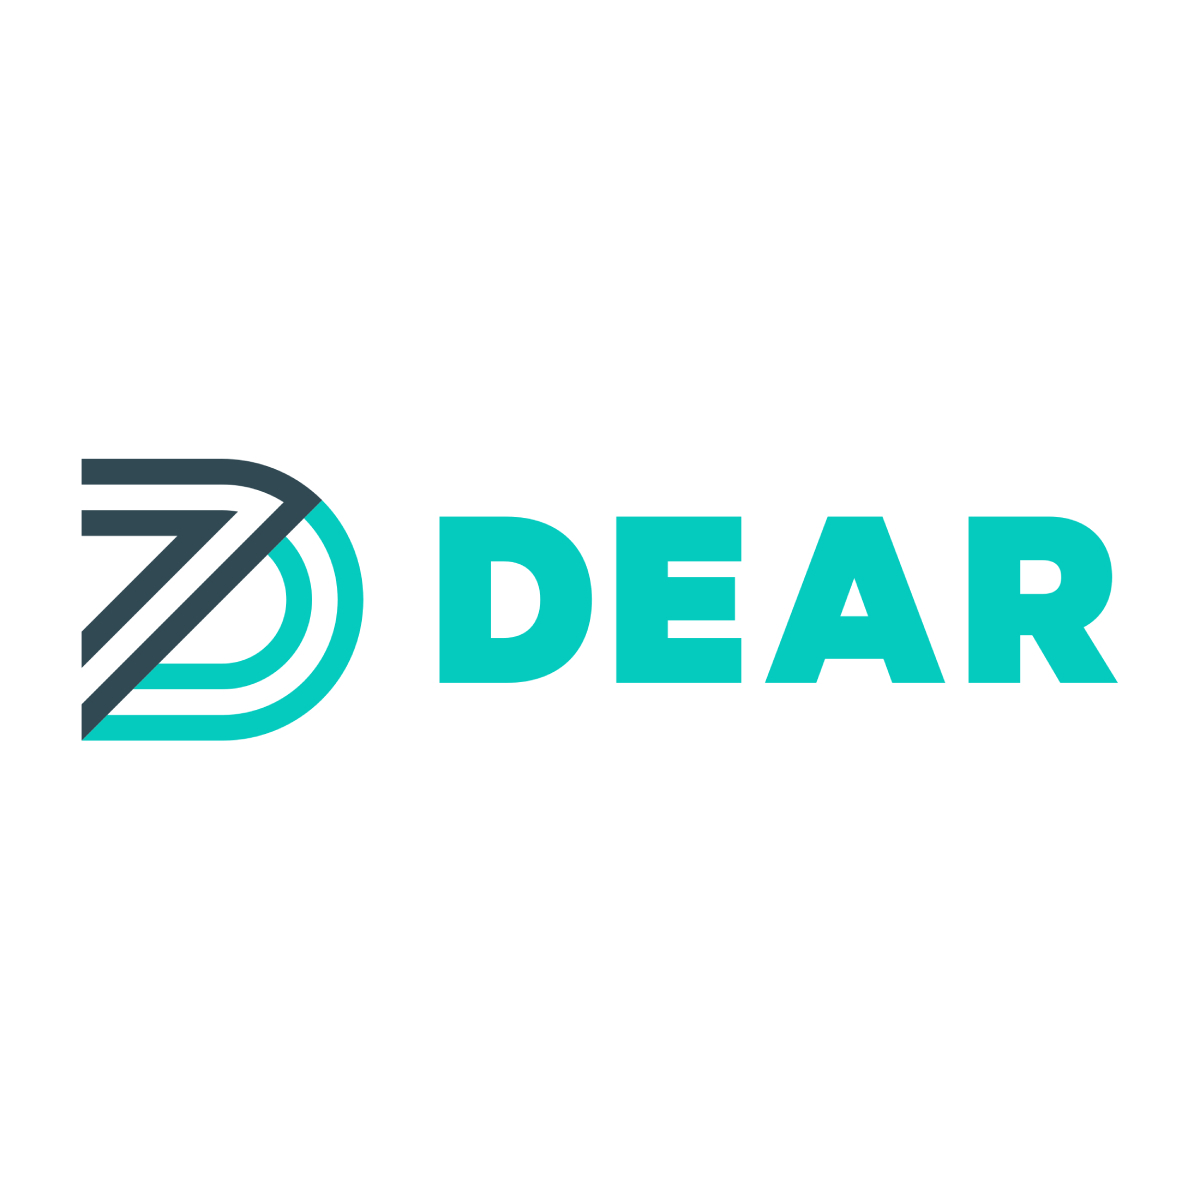 What are the benefits of using DEAR for your business?